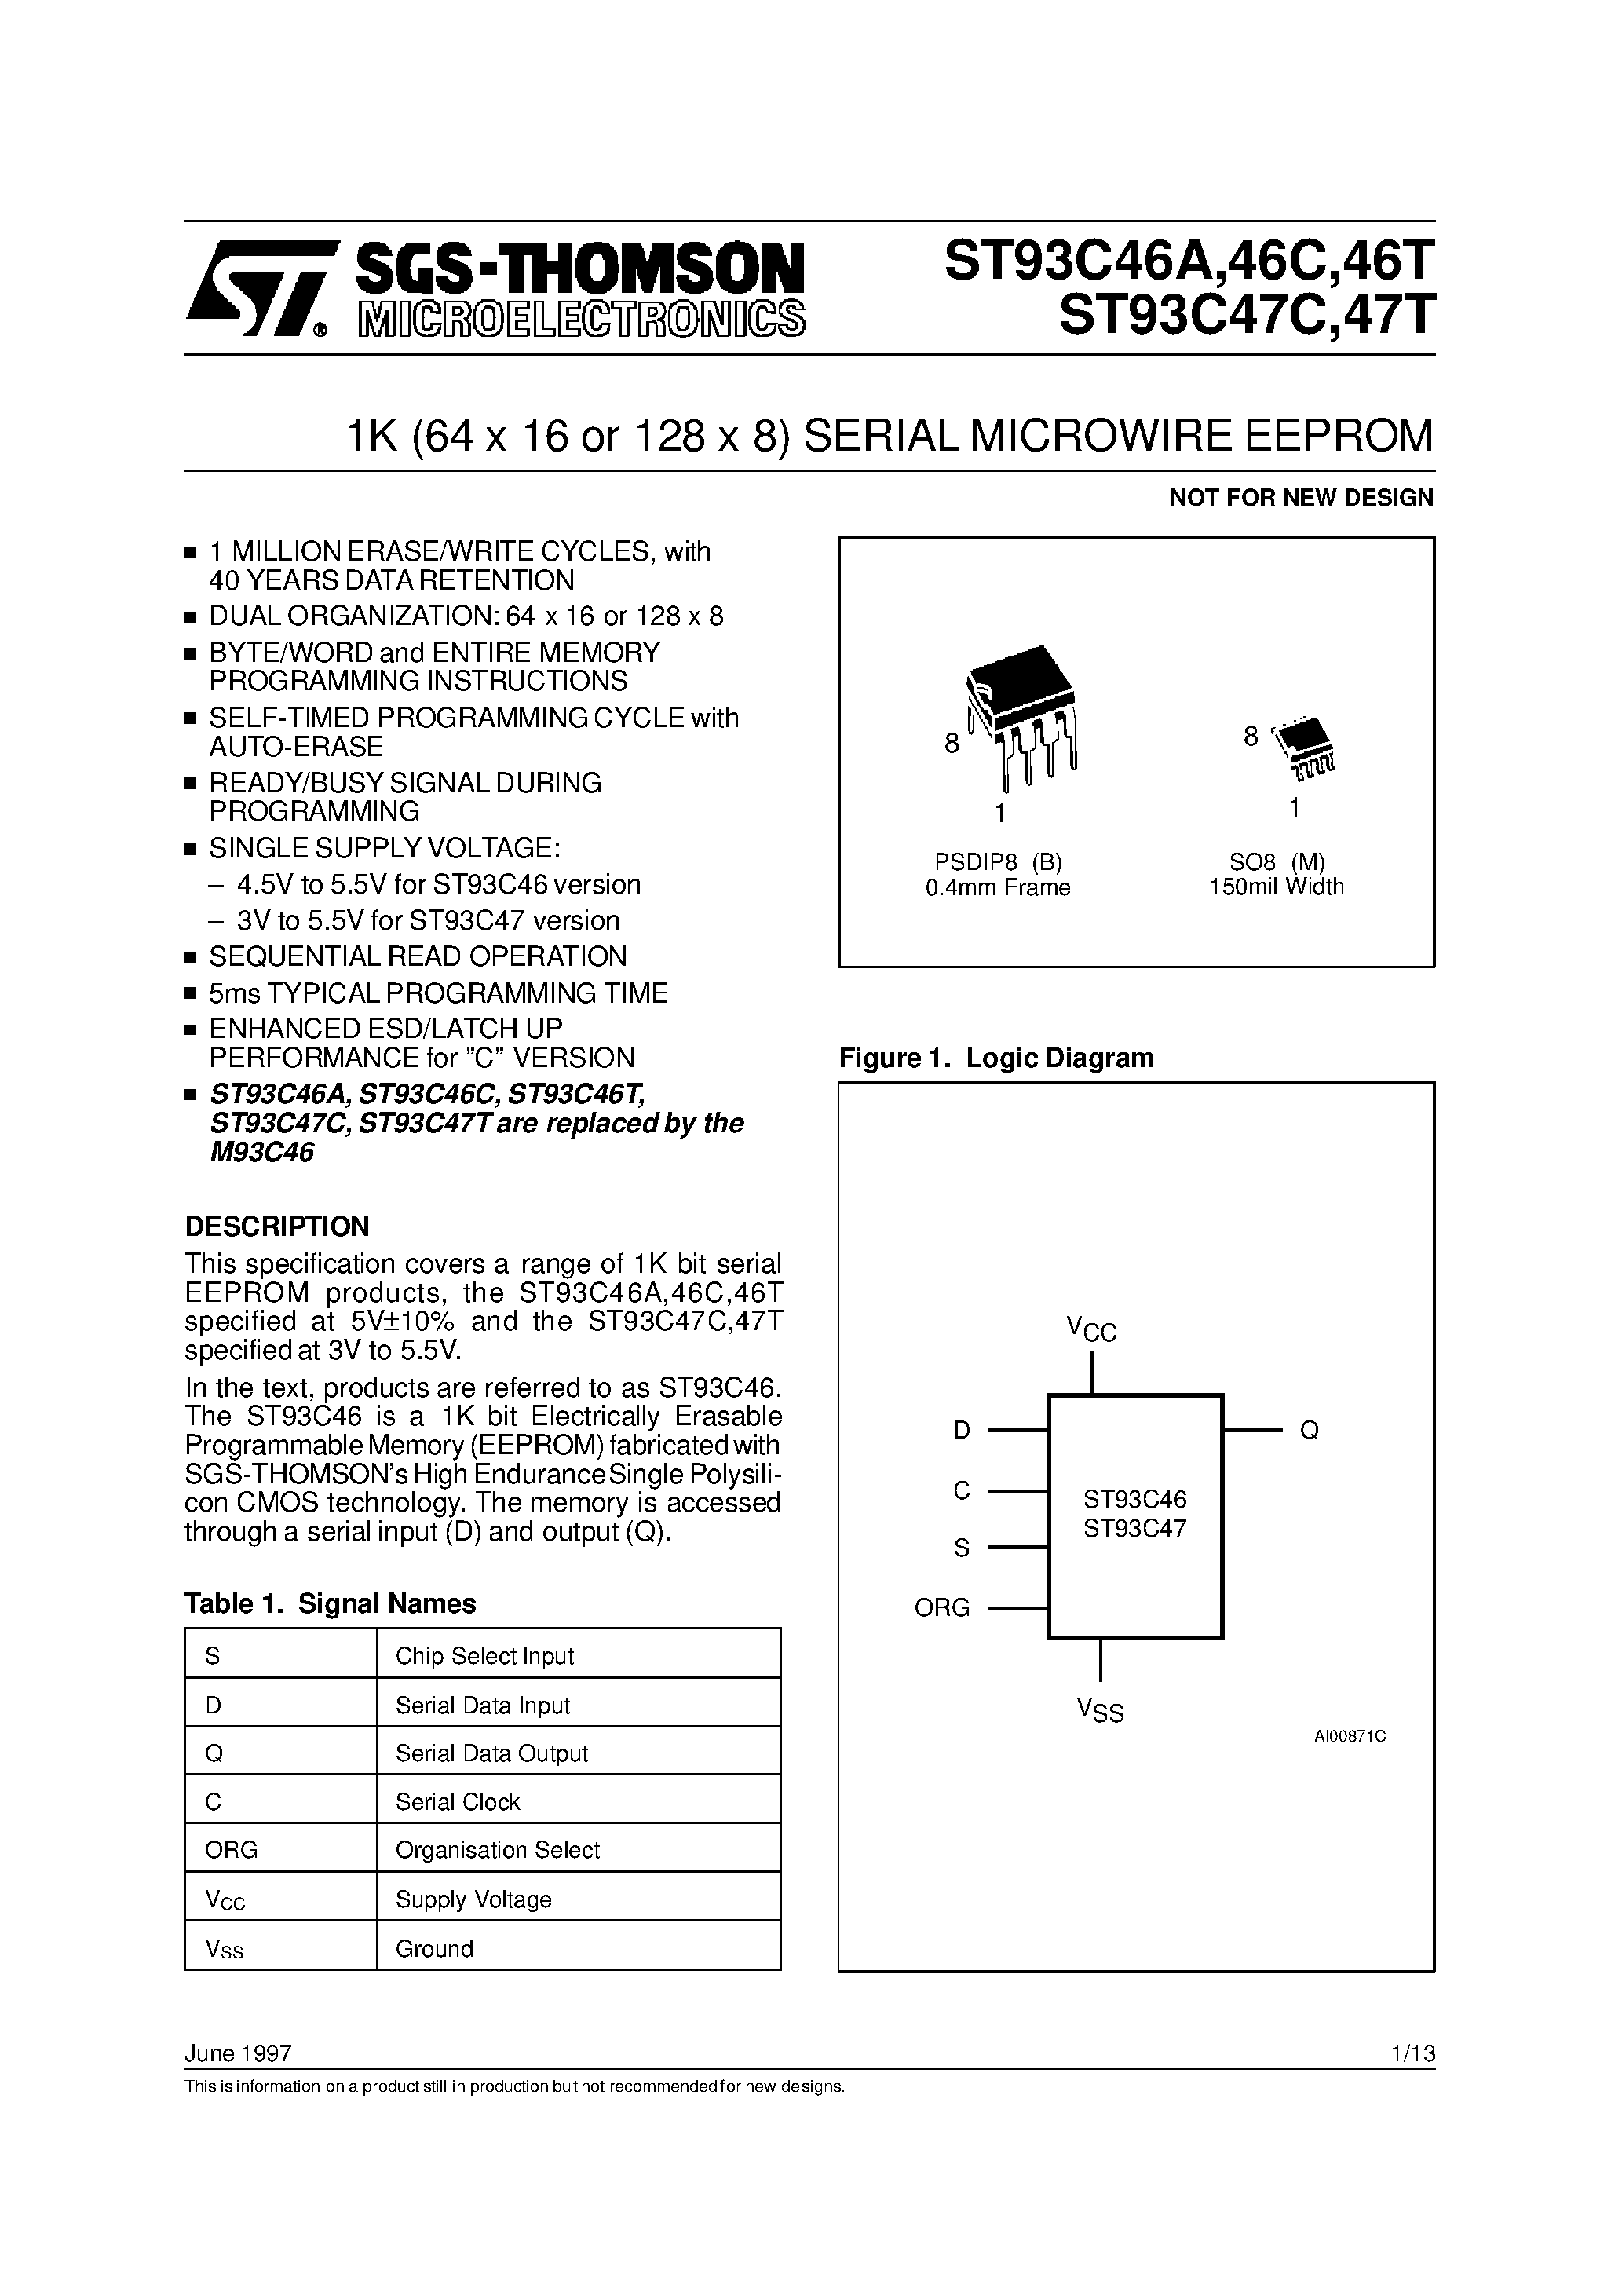 Datasheet ST93C46 - 1K 64 x 16 or 128 x 8 SERIAL MICROWIRE EEPROM page 1